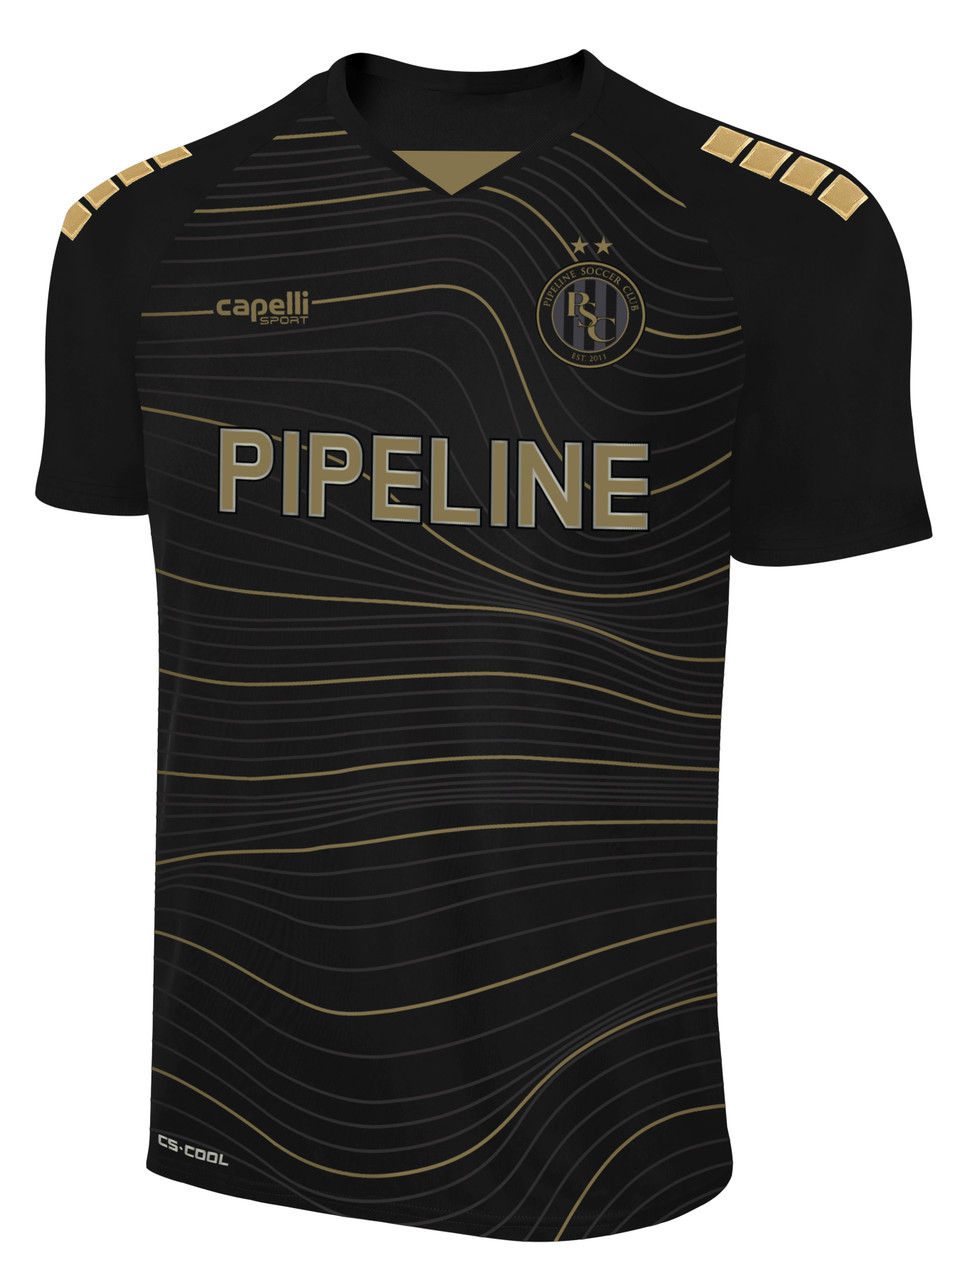 ECNL PIPELINE SC MADISON 2 COLOR LARGE WAVE SHORT SLEEVE MATCH JERSEY BLACK  GOLD METALLIC -- WL IS ON BACK ORDER AND WILL SHIP 7/23/21 - Capelli Sport